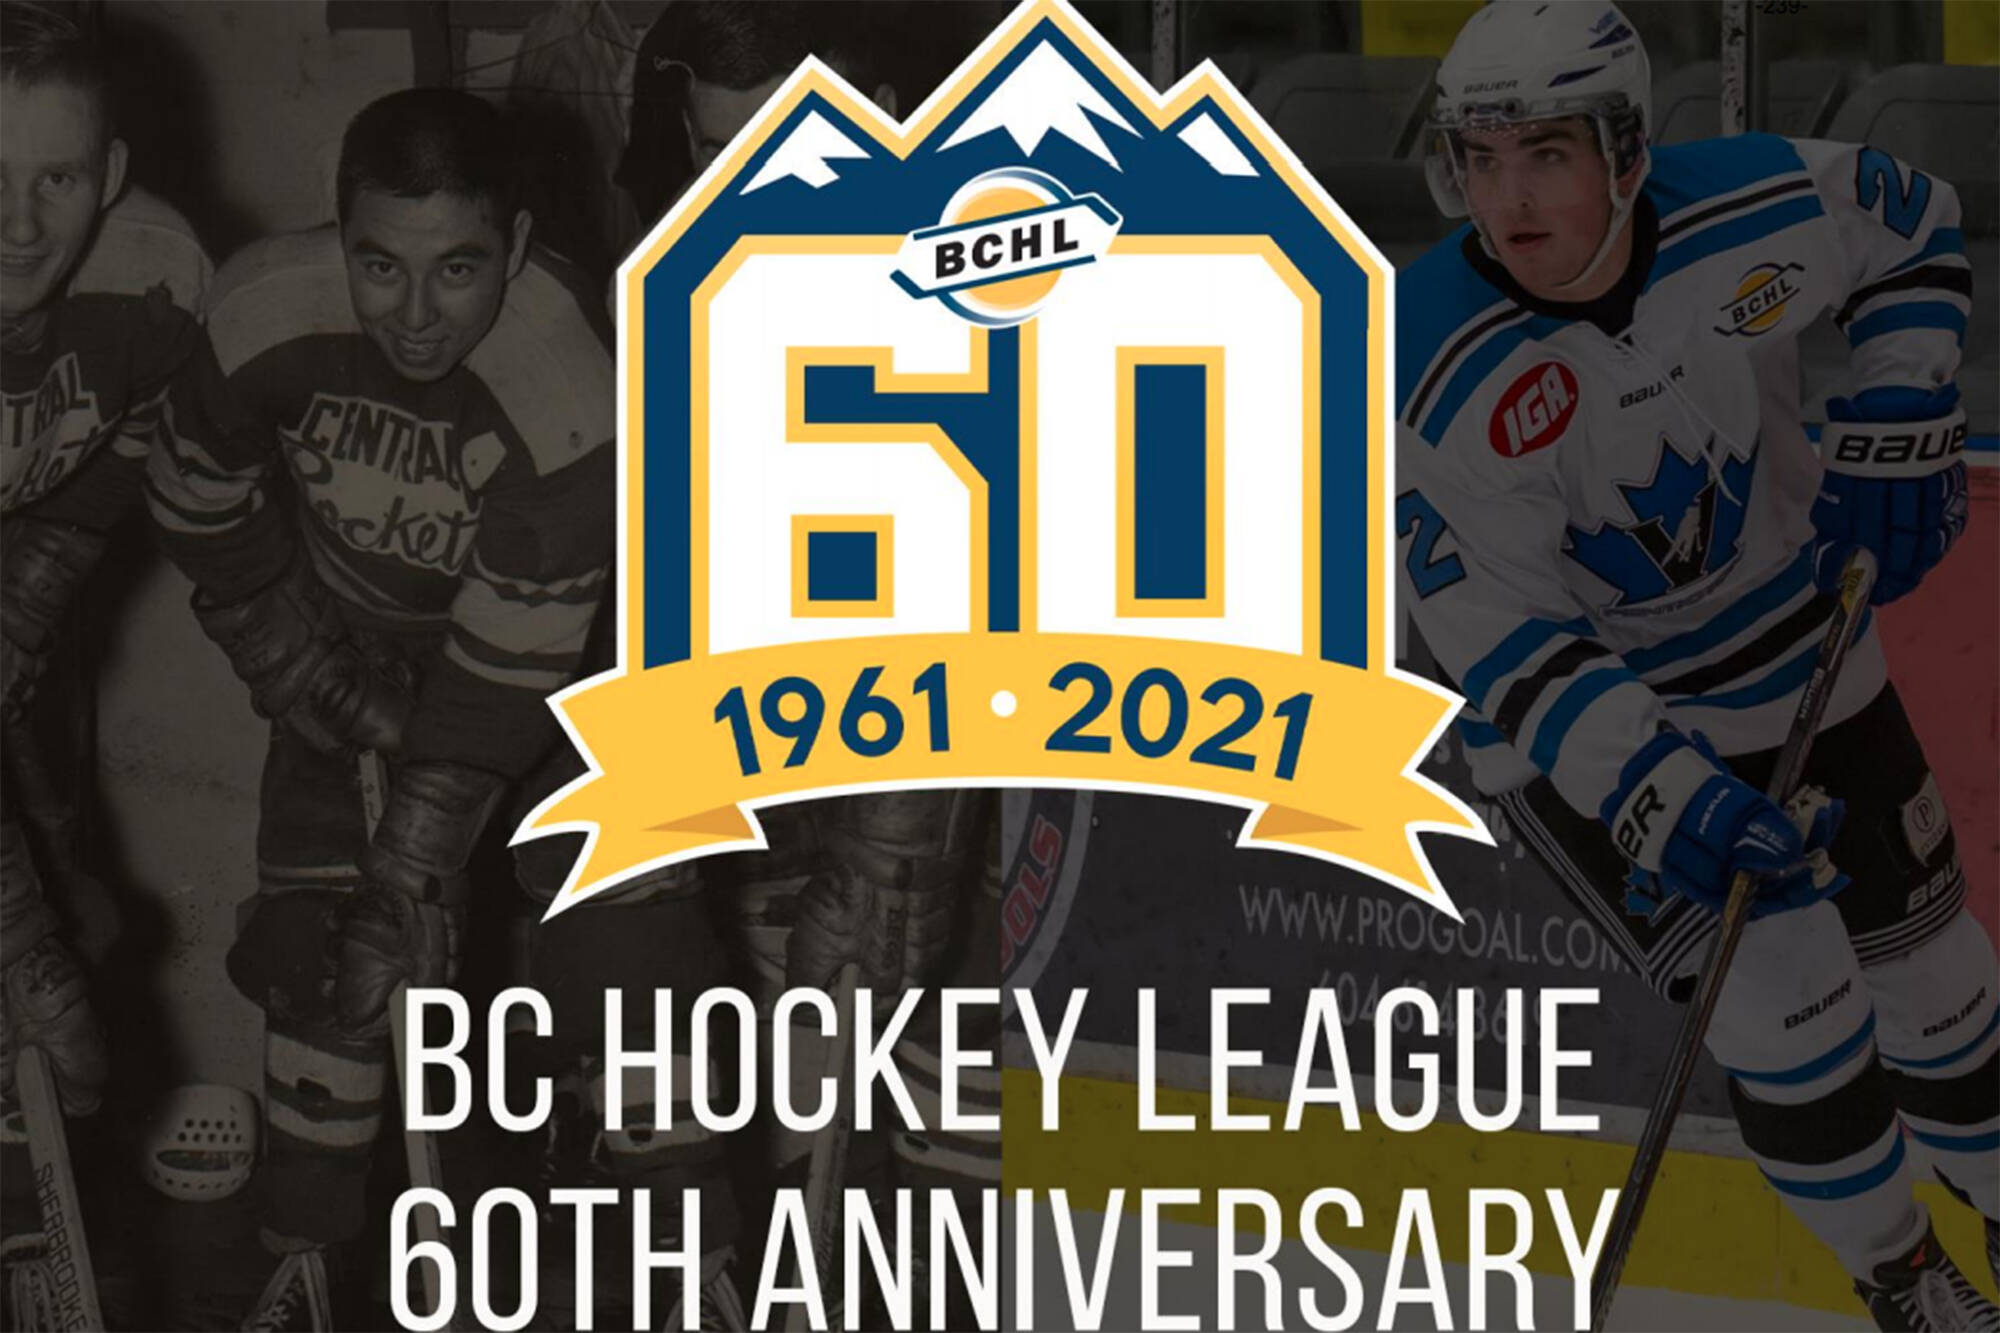 The league will be celebrating with an outdoor all-stars game in Penticton in January, 2023. (BCHL)